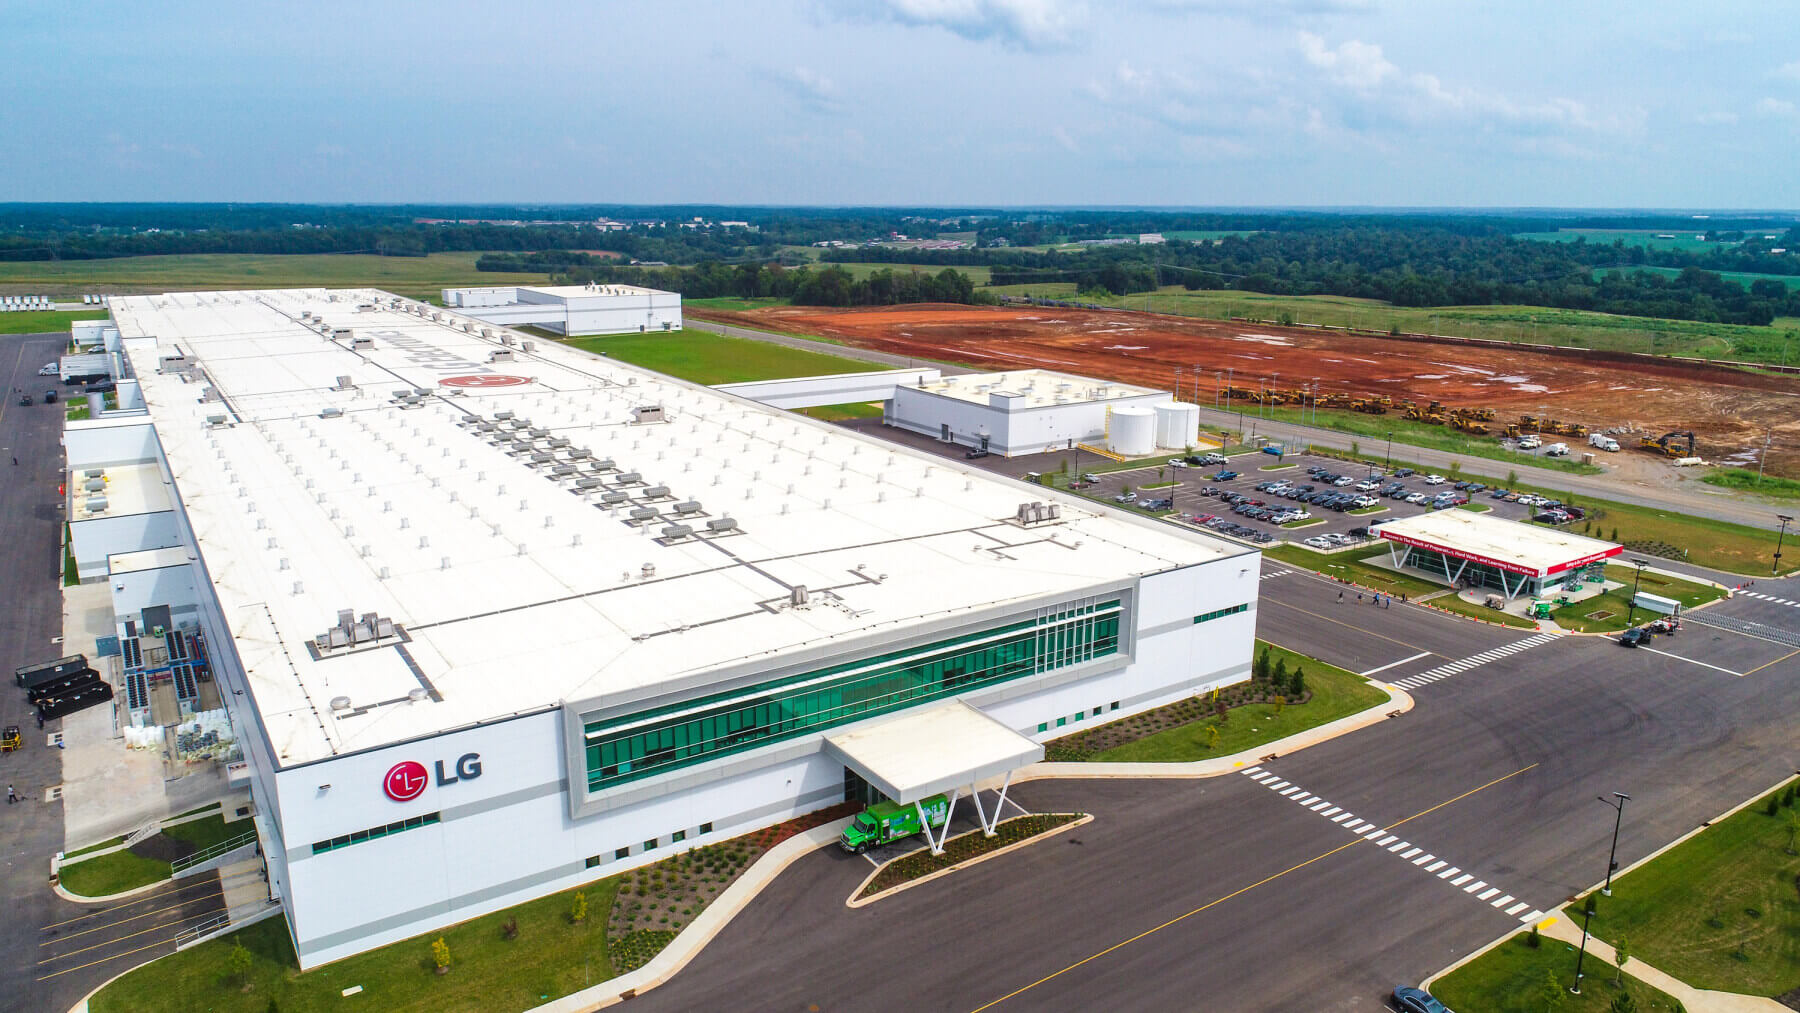 an exterior view of the LG Electronics appliance manufacturing plant